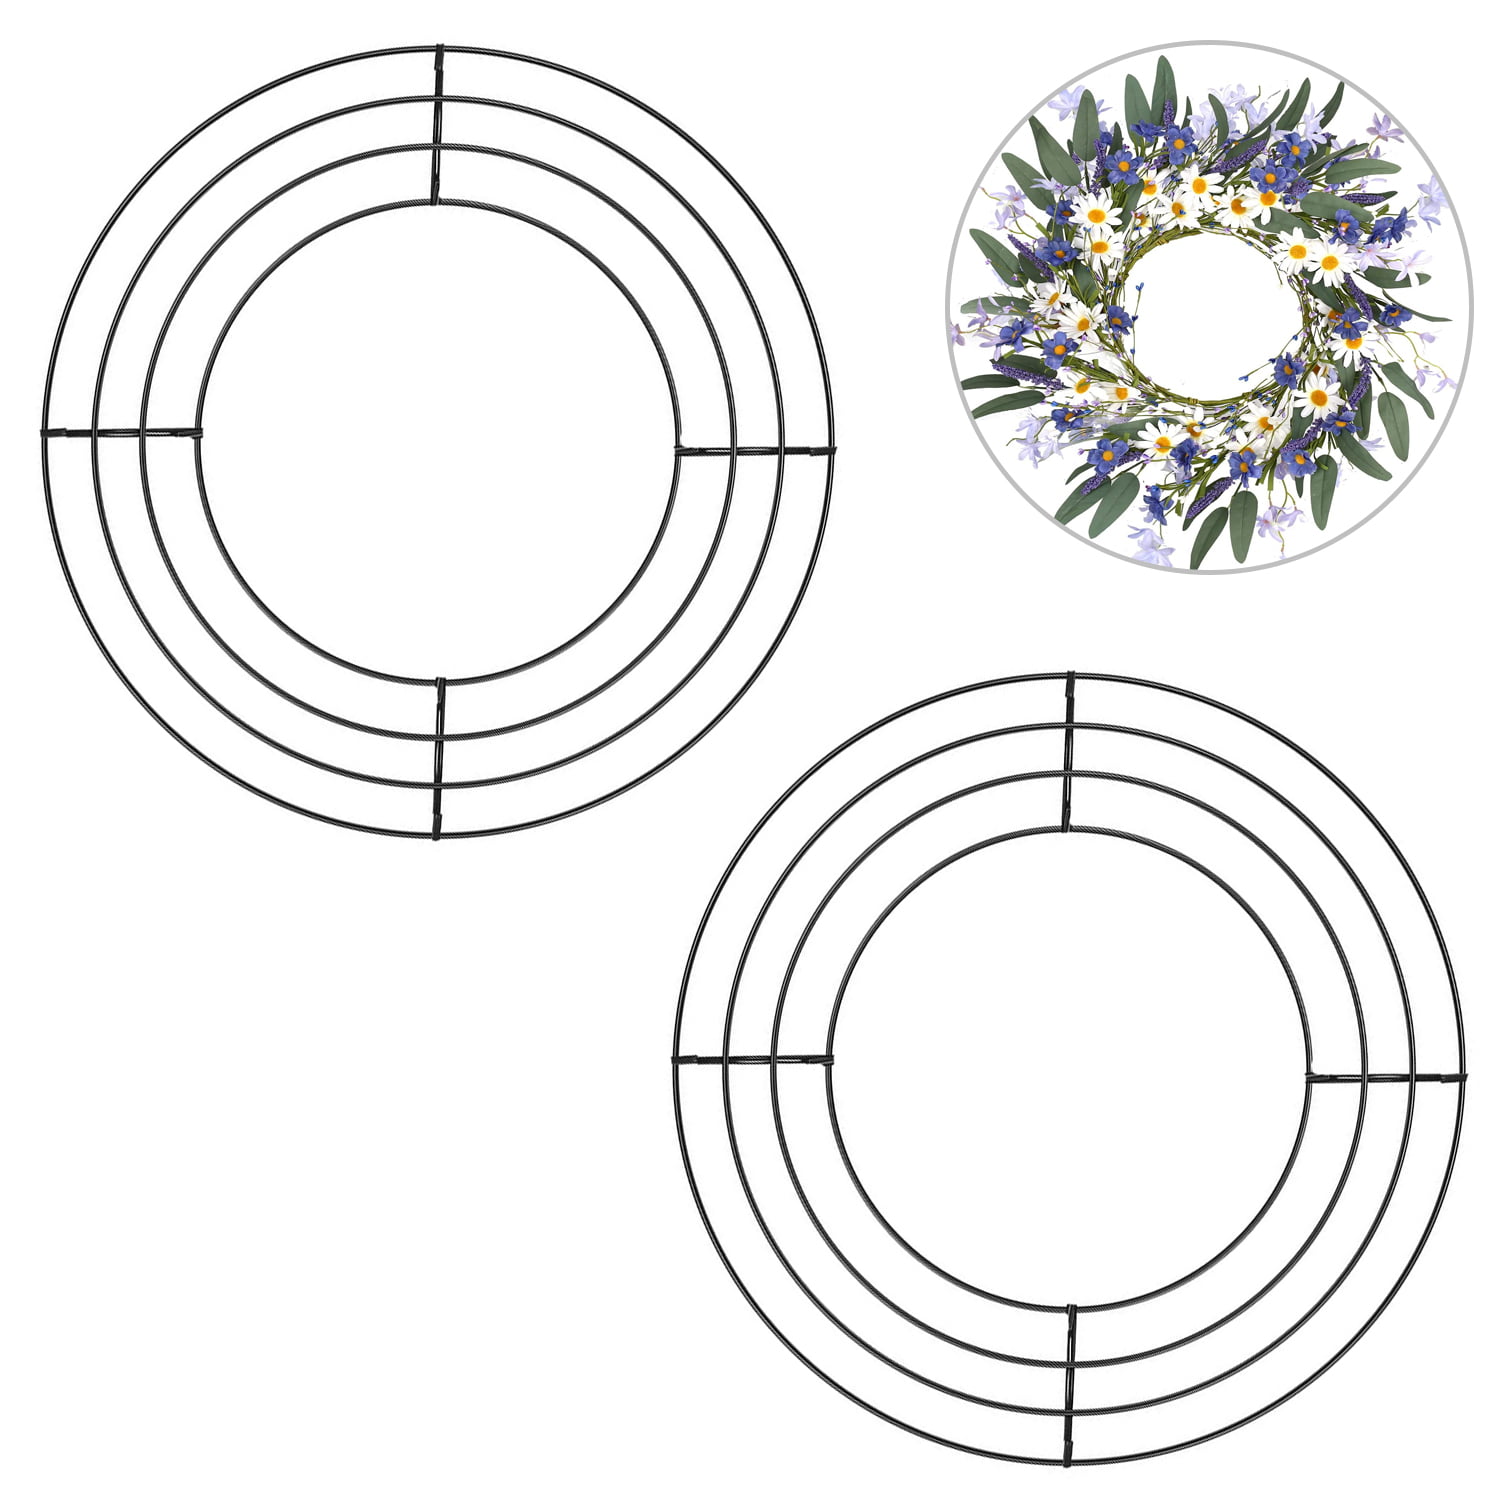 MTB Wire Wreath Rings Wire Wreath Frame for Christmas Party Decoration 14 Green Pack of 5 